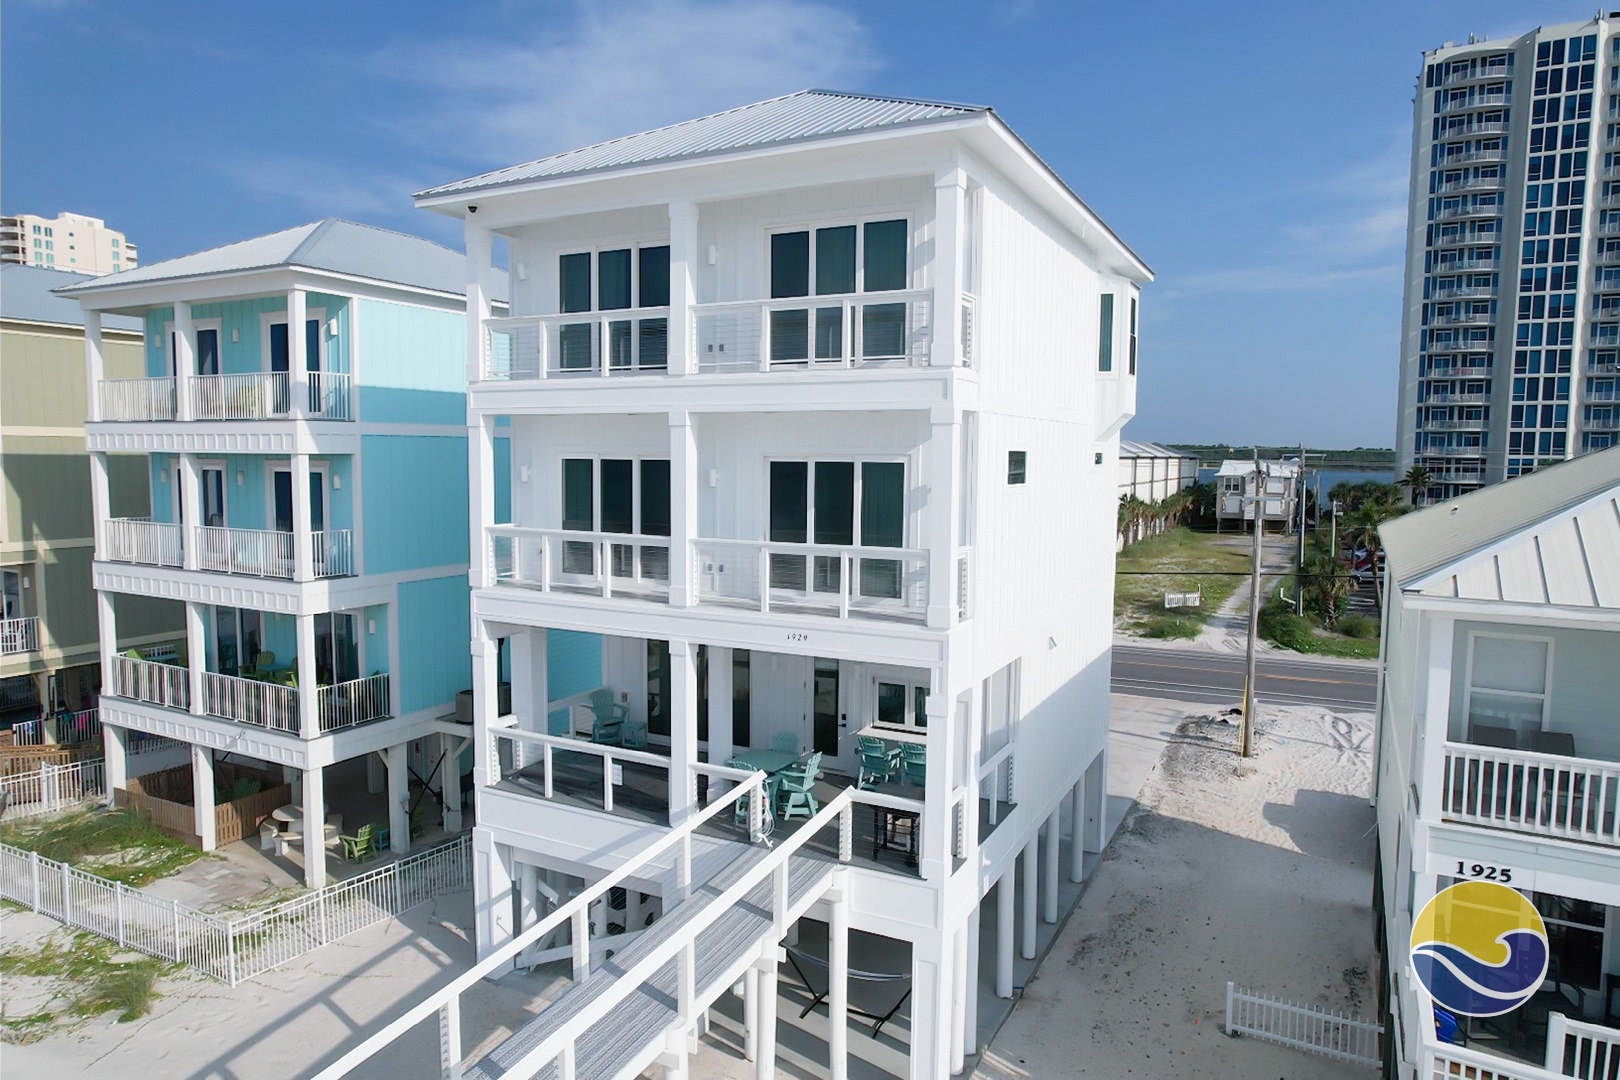 A Beach Paradise is a 3 story home located on West Beach Blvd in Gulf Shores